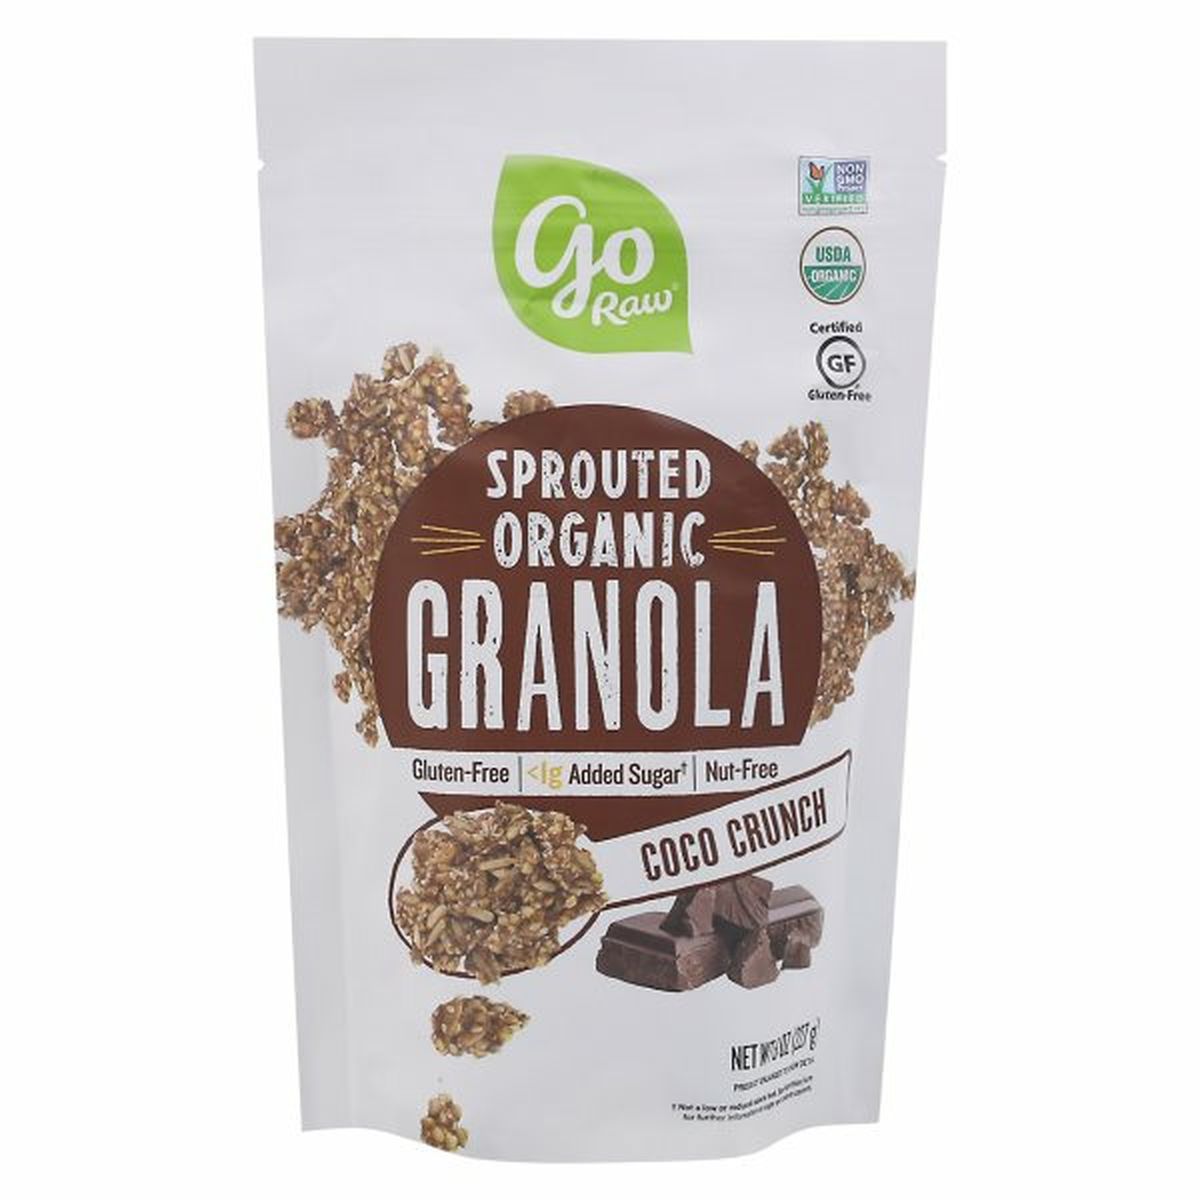 Calories in Go Raw Granola, Organic, Coco Crunch, Sprouted